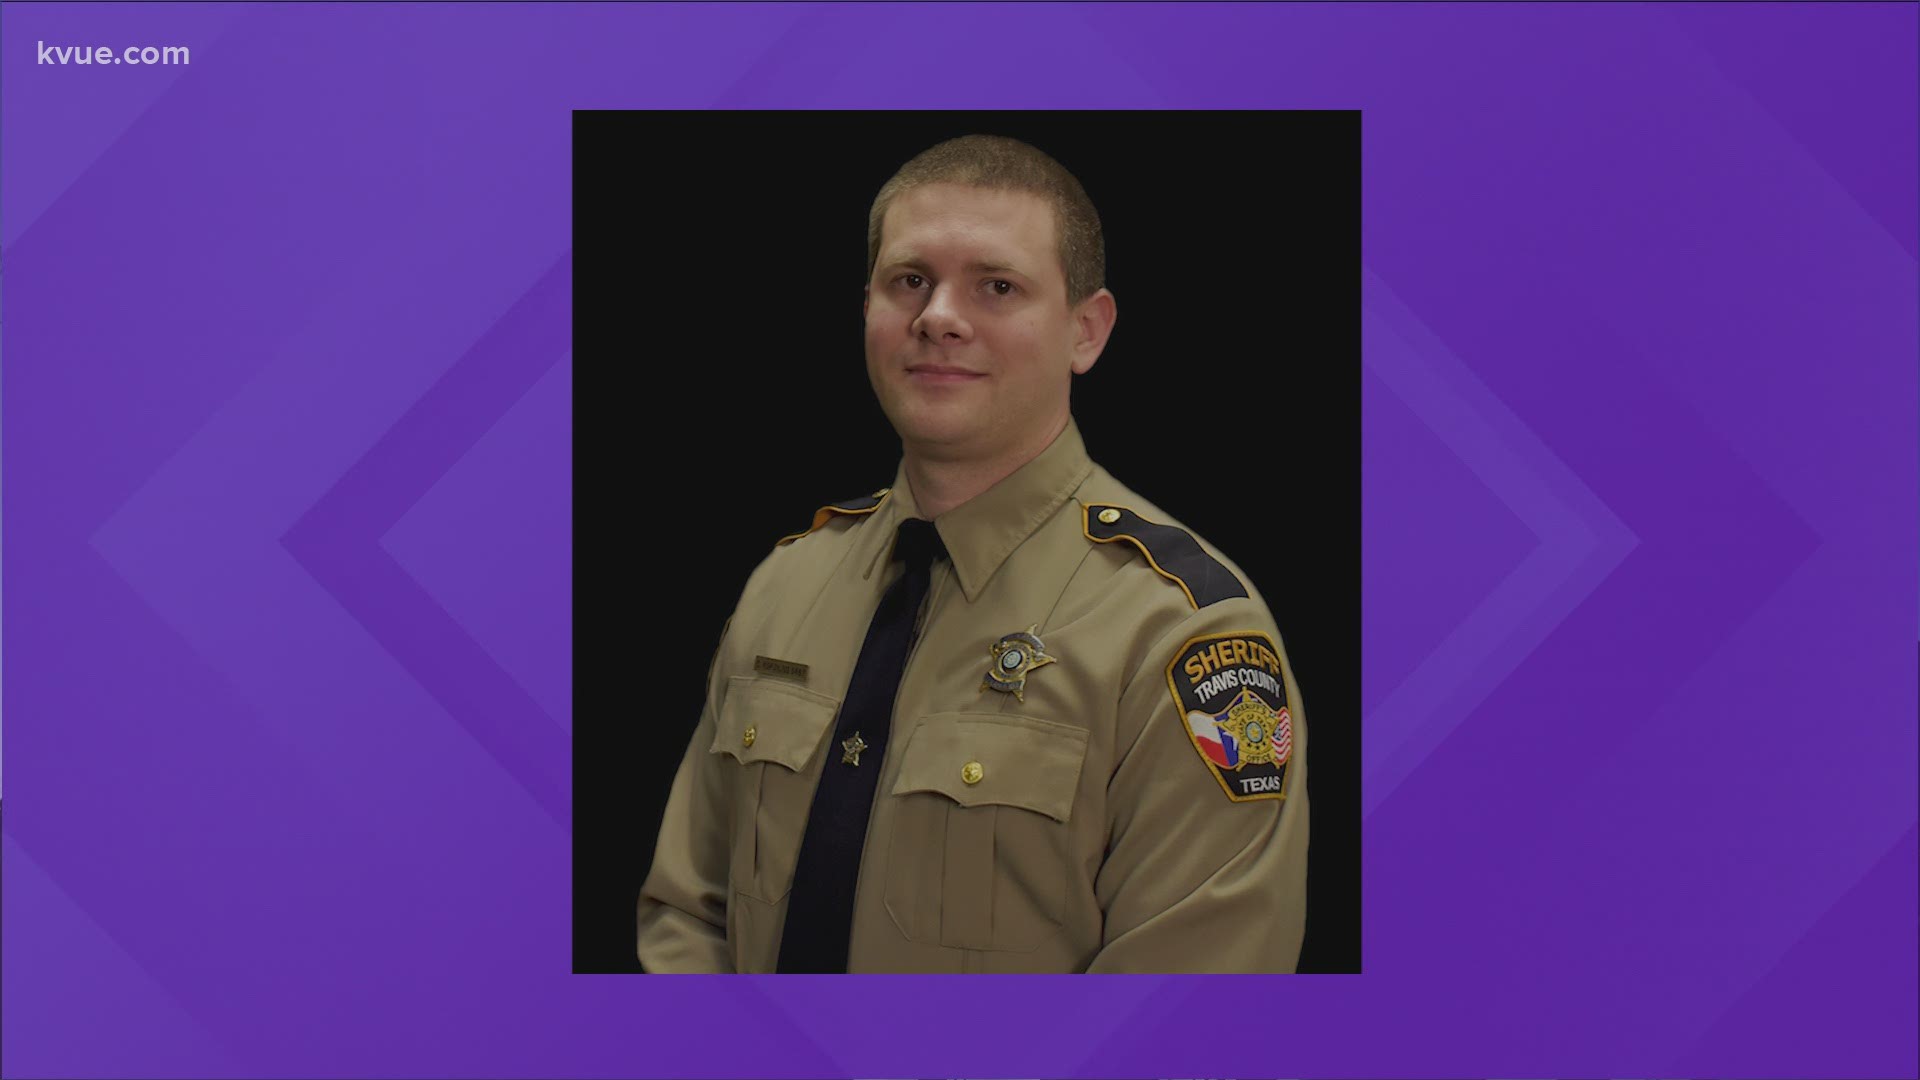 Korzilius was killed in a car crash while on duty in March of 2020. The service is Thursday at 1 p.m. at Austin Ridge Bible Church.